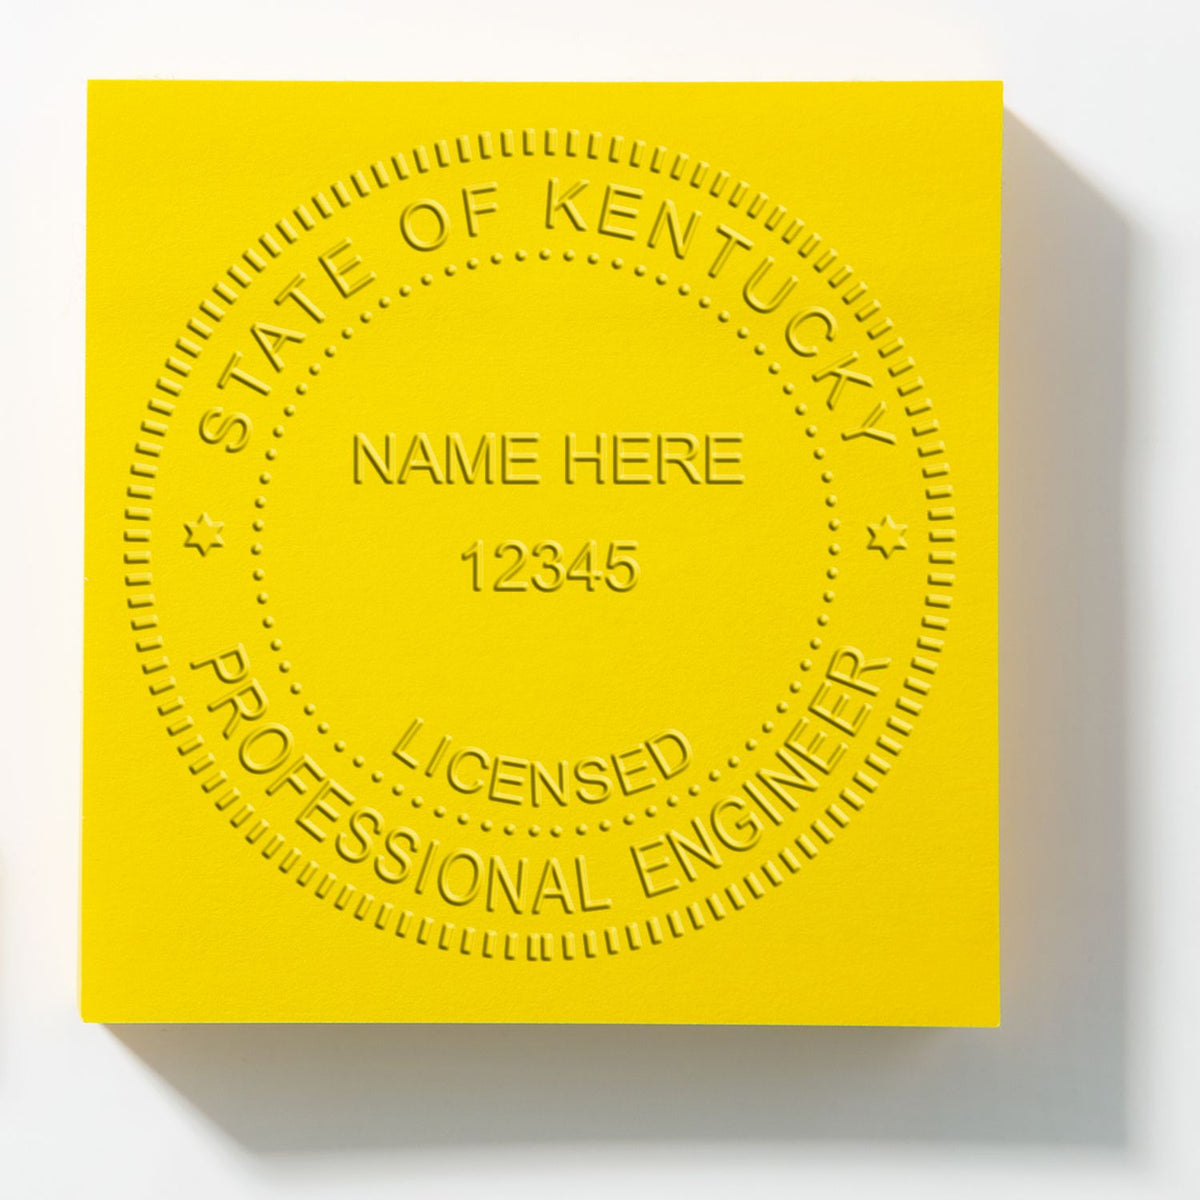 This paper is stamped with a sample imprint of the Soft Kentucky Professional Engineer Seal, signifying its quality and reliability.